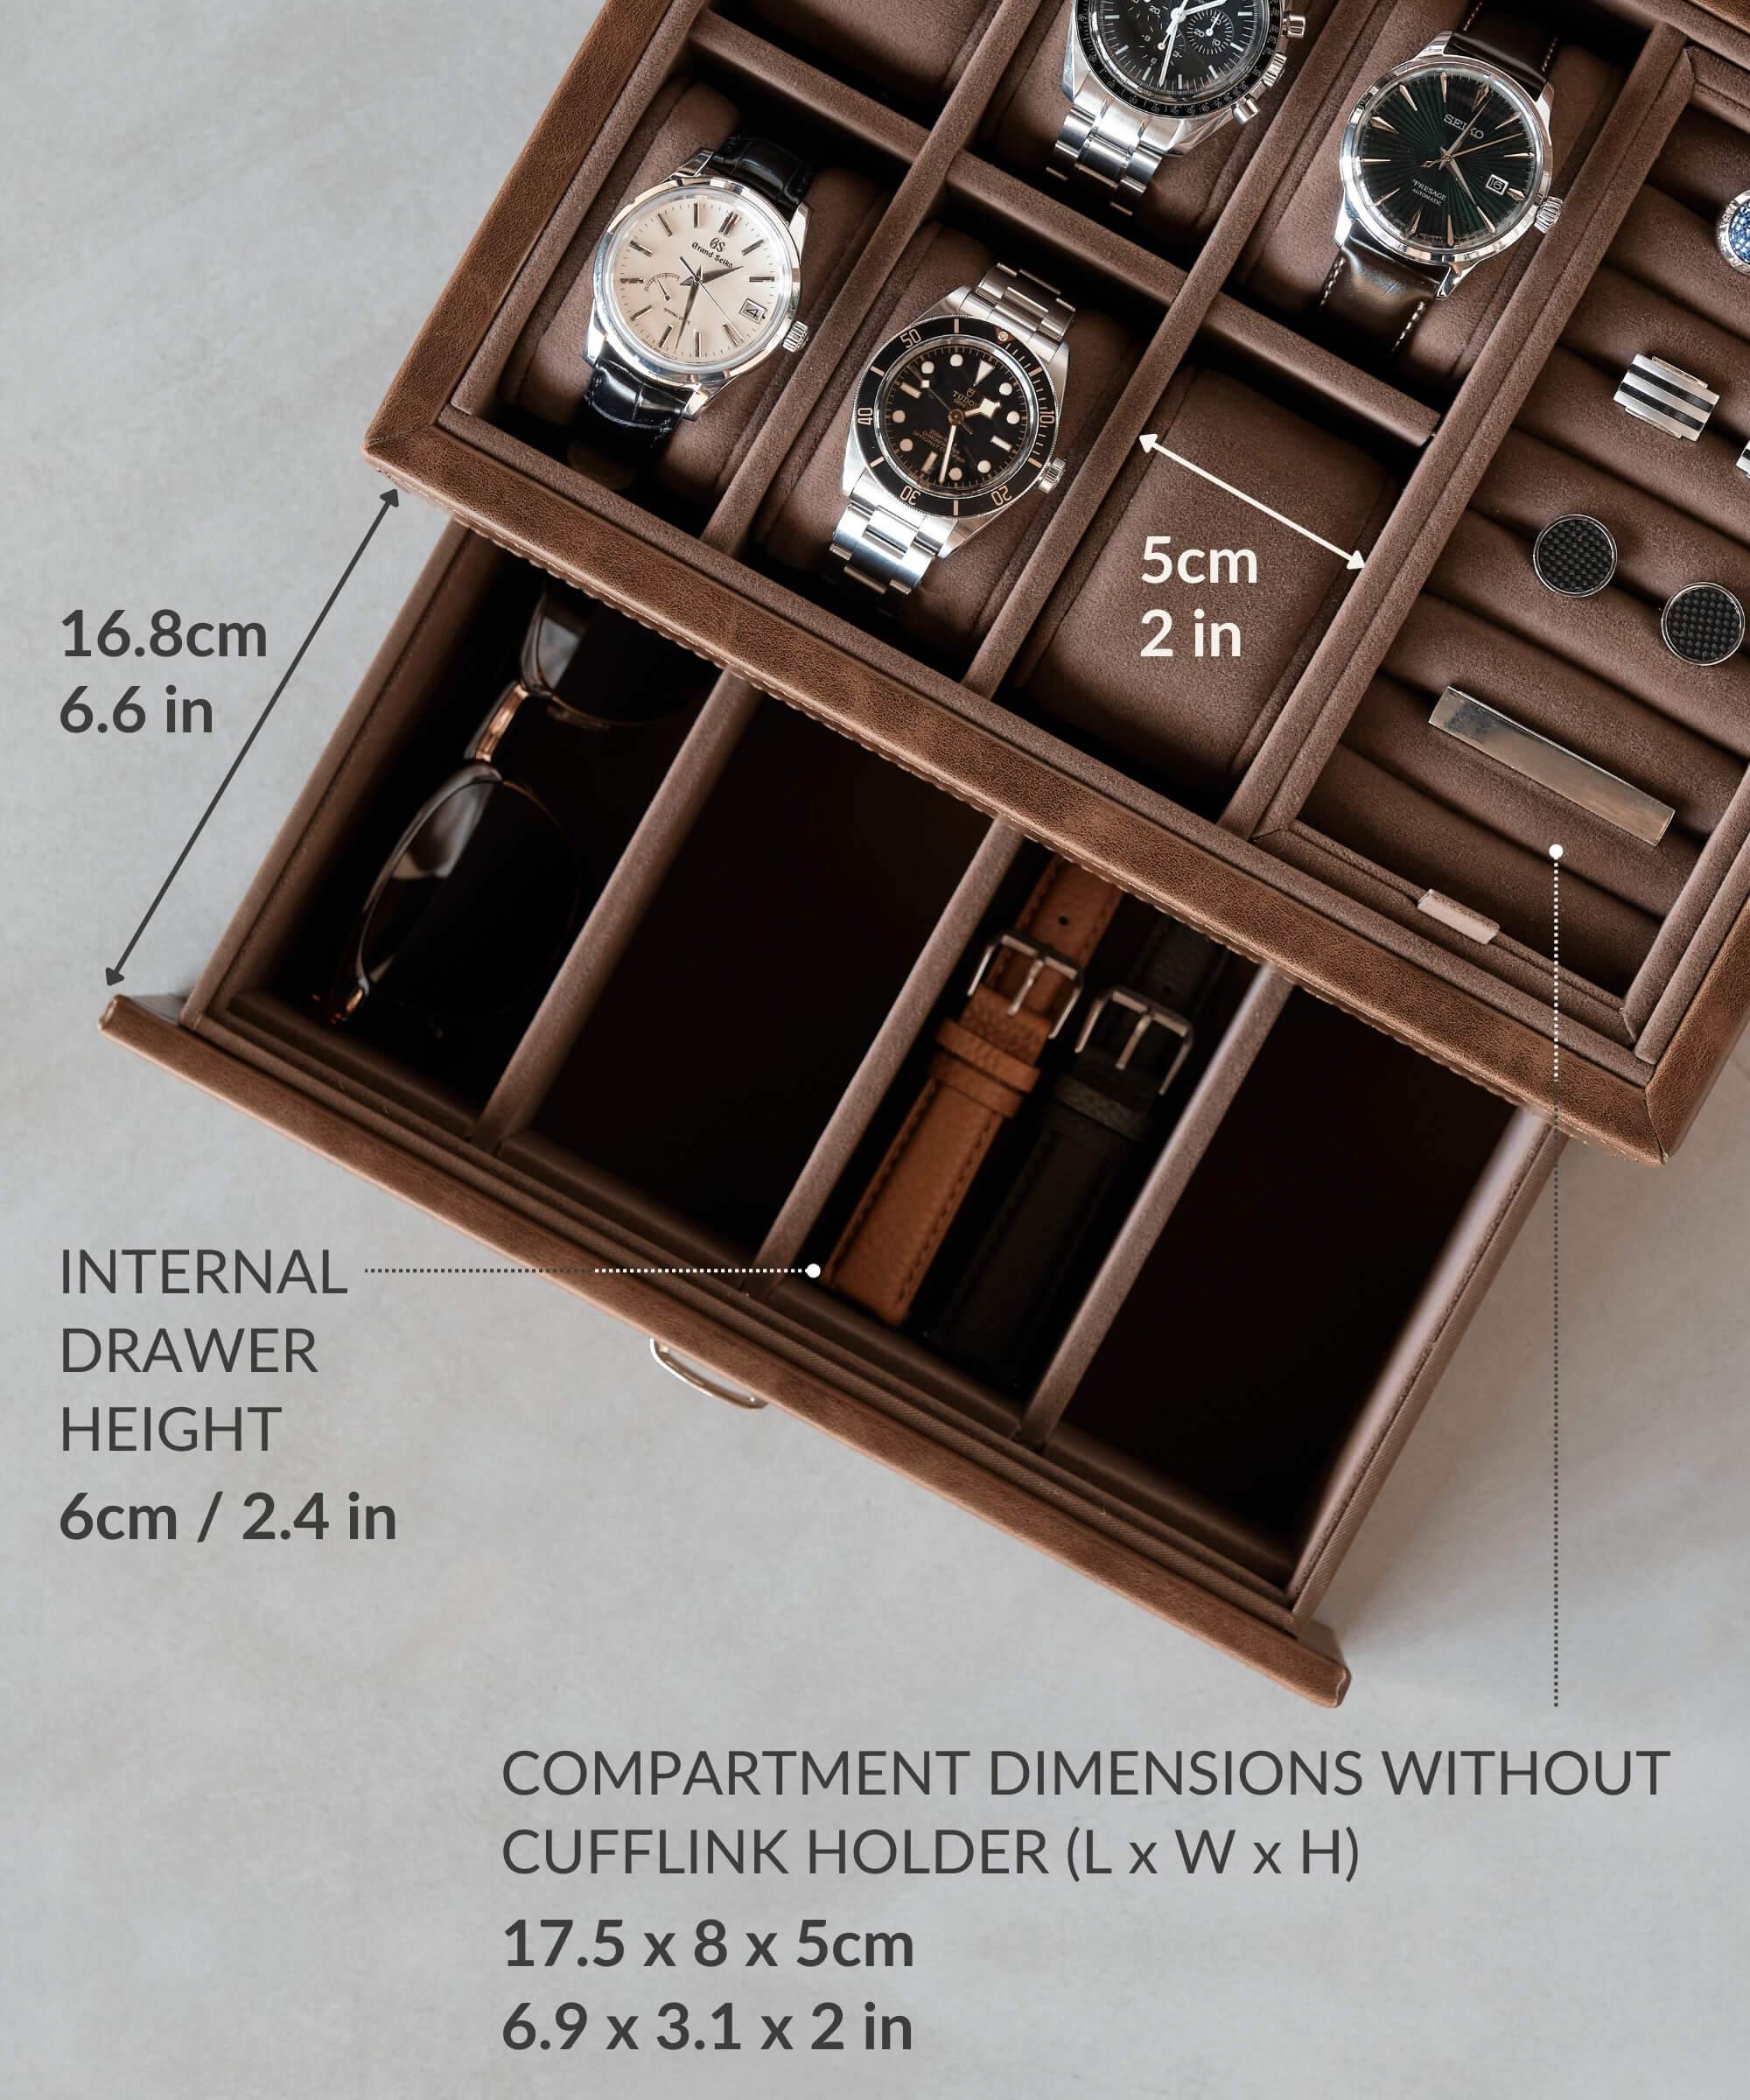 A TAWBURY Bayswater 6 Watch Jewellery Box - Brown with a number of watches in it, perfect for watch enthusiasts.